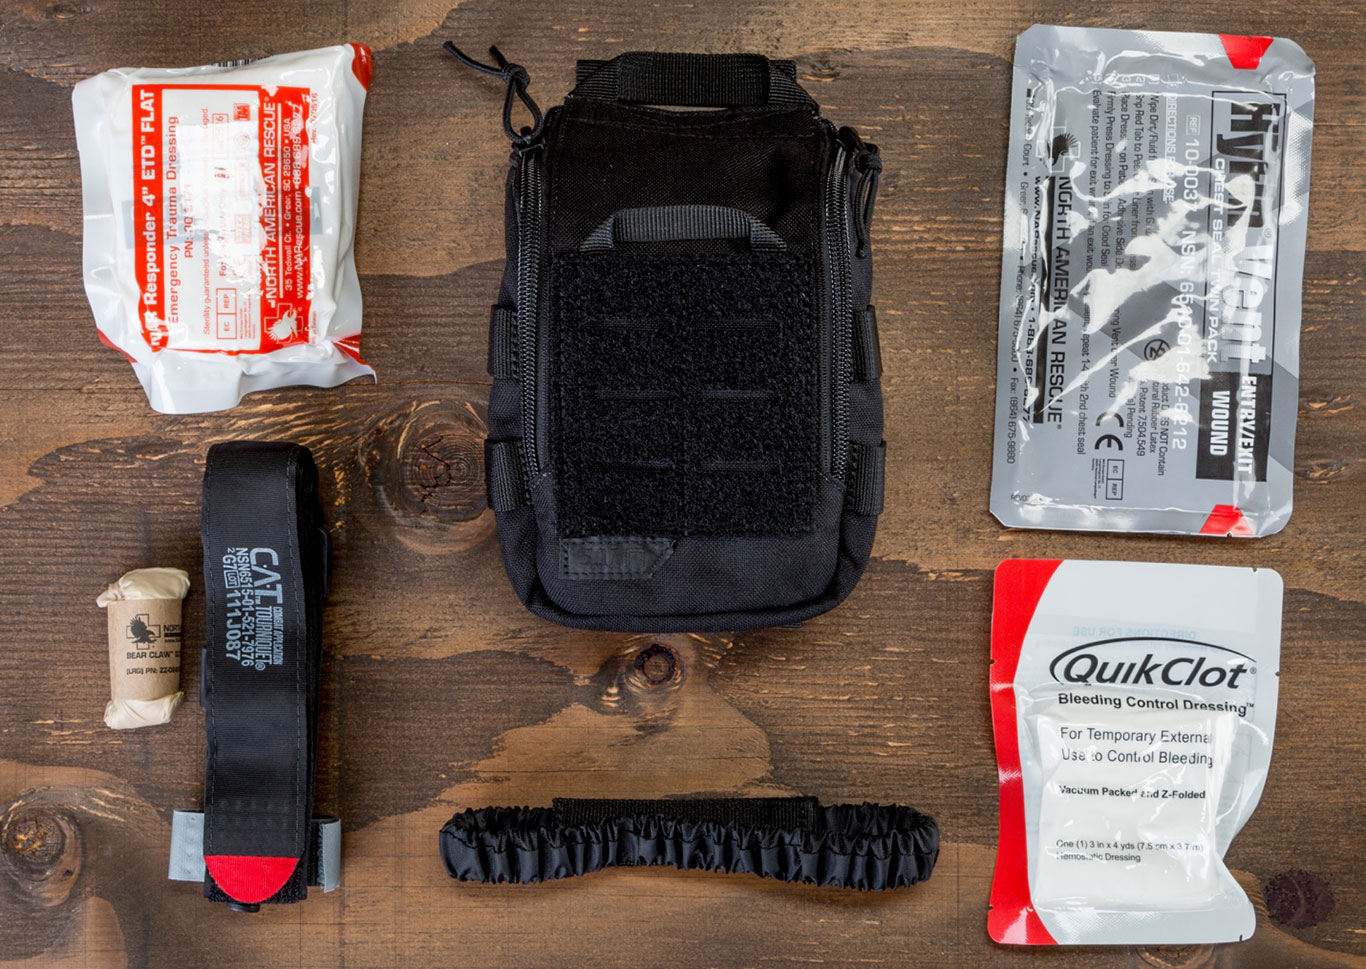 Every shooter should carry a medical kit that can treat a gunshot wound until medics can arrive.